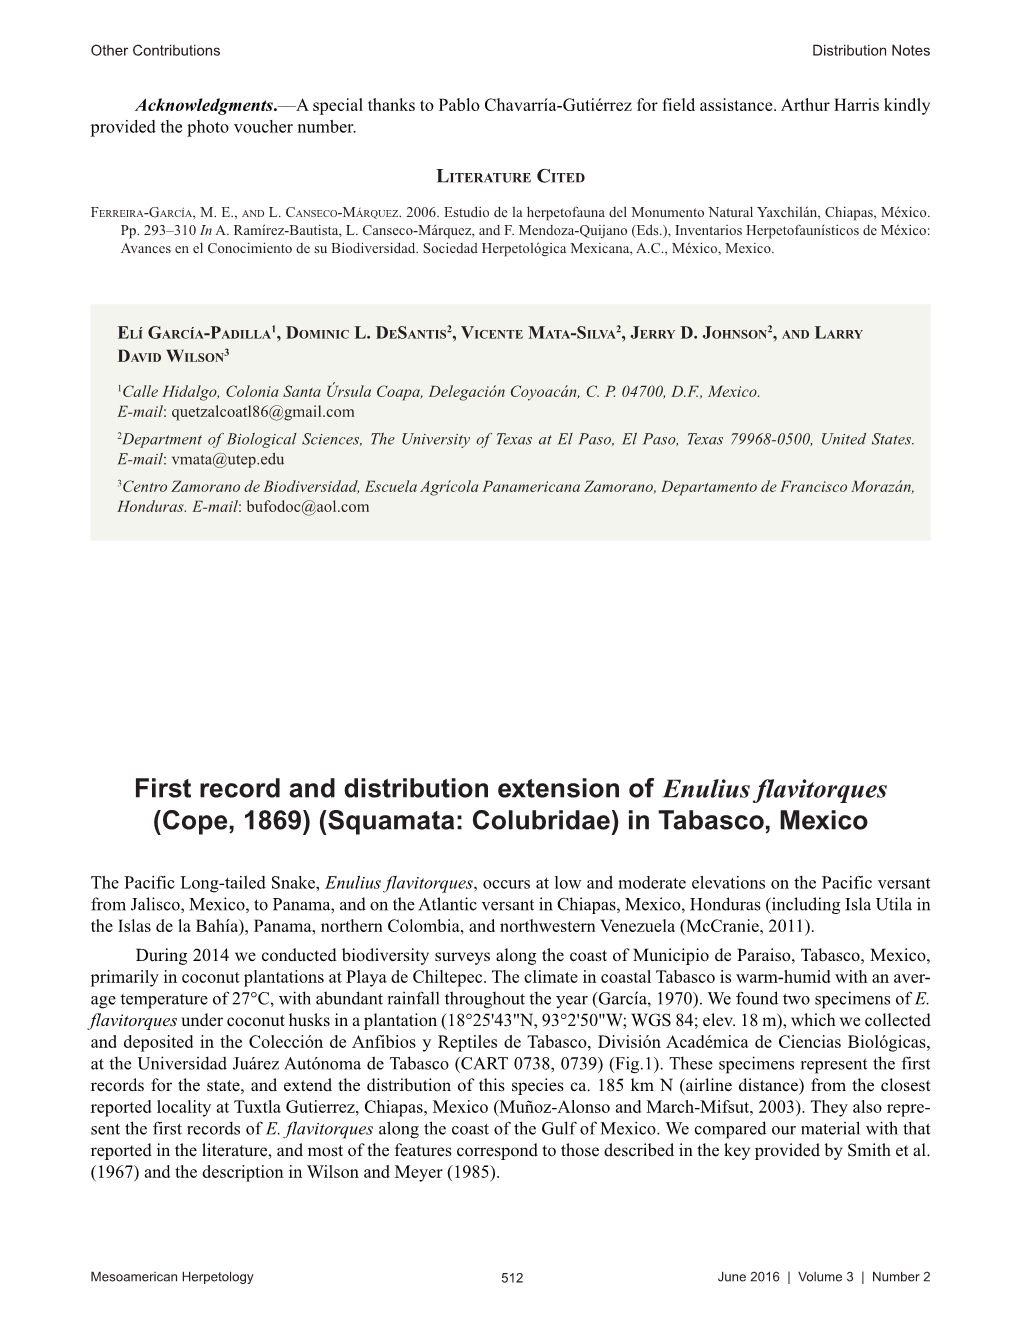 First Record and Distribution Extension of Enulius Flavitorques (Cope, 1869) (Squamata: Colubridae) in Tabasco, Mexico